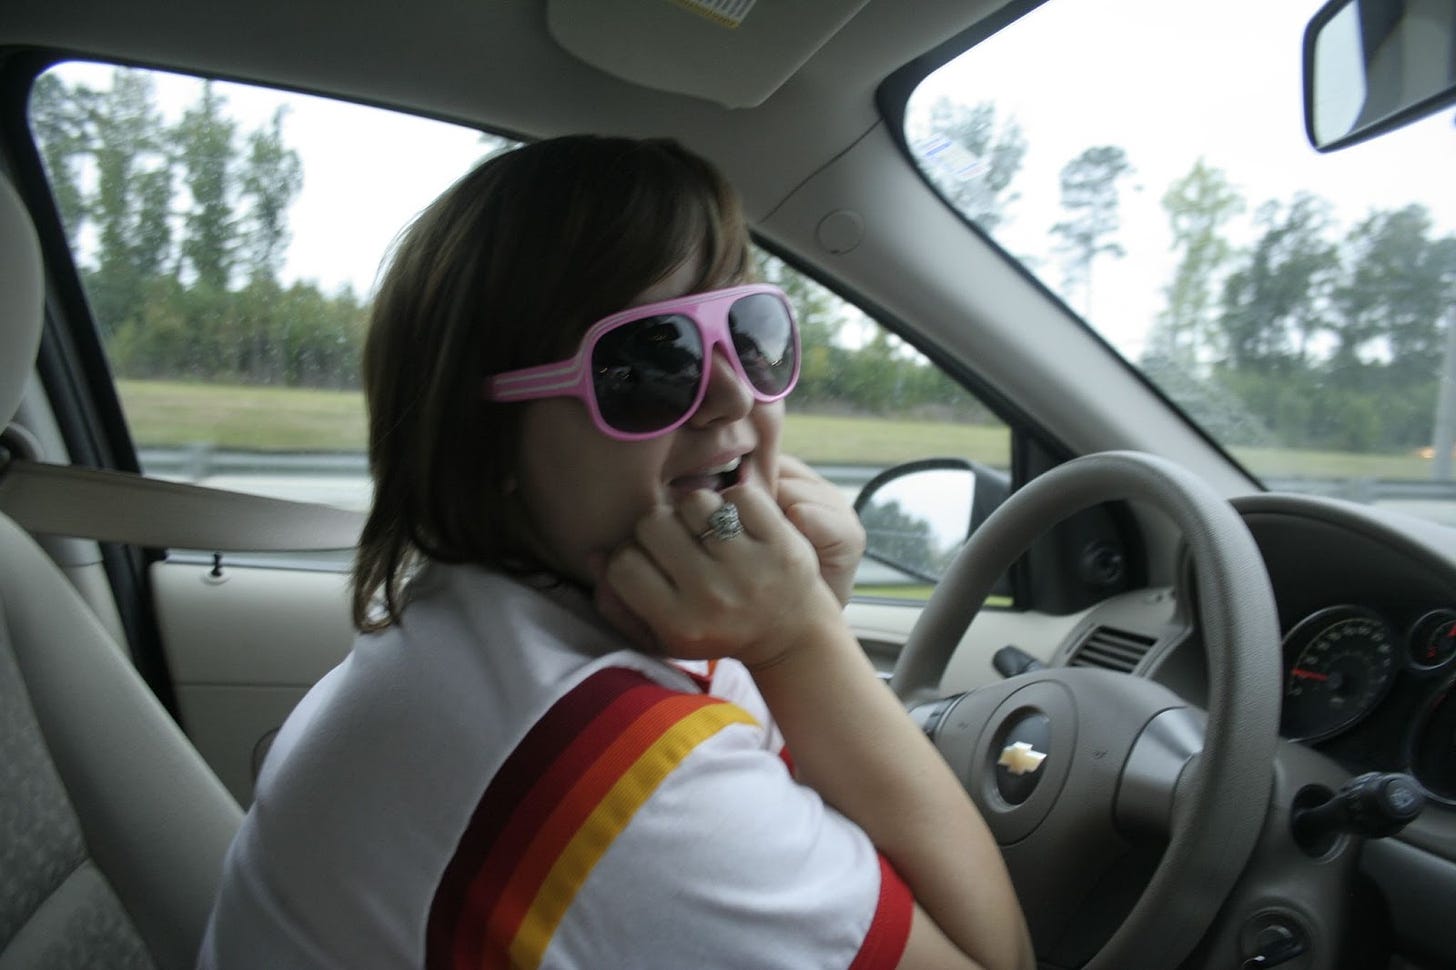 An old pic of Deanna behind the wheel of a chevy wearing pink aviators and a white tshirt with stripes. She's ready for a road trip. But not to sell Mary Kay. 